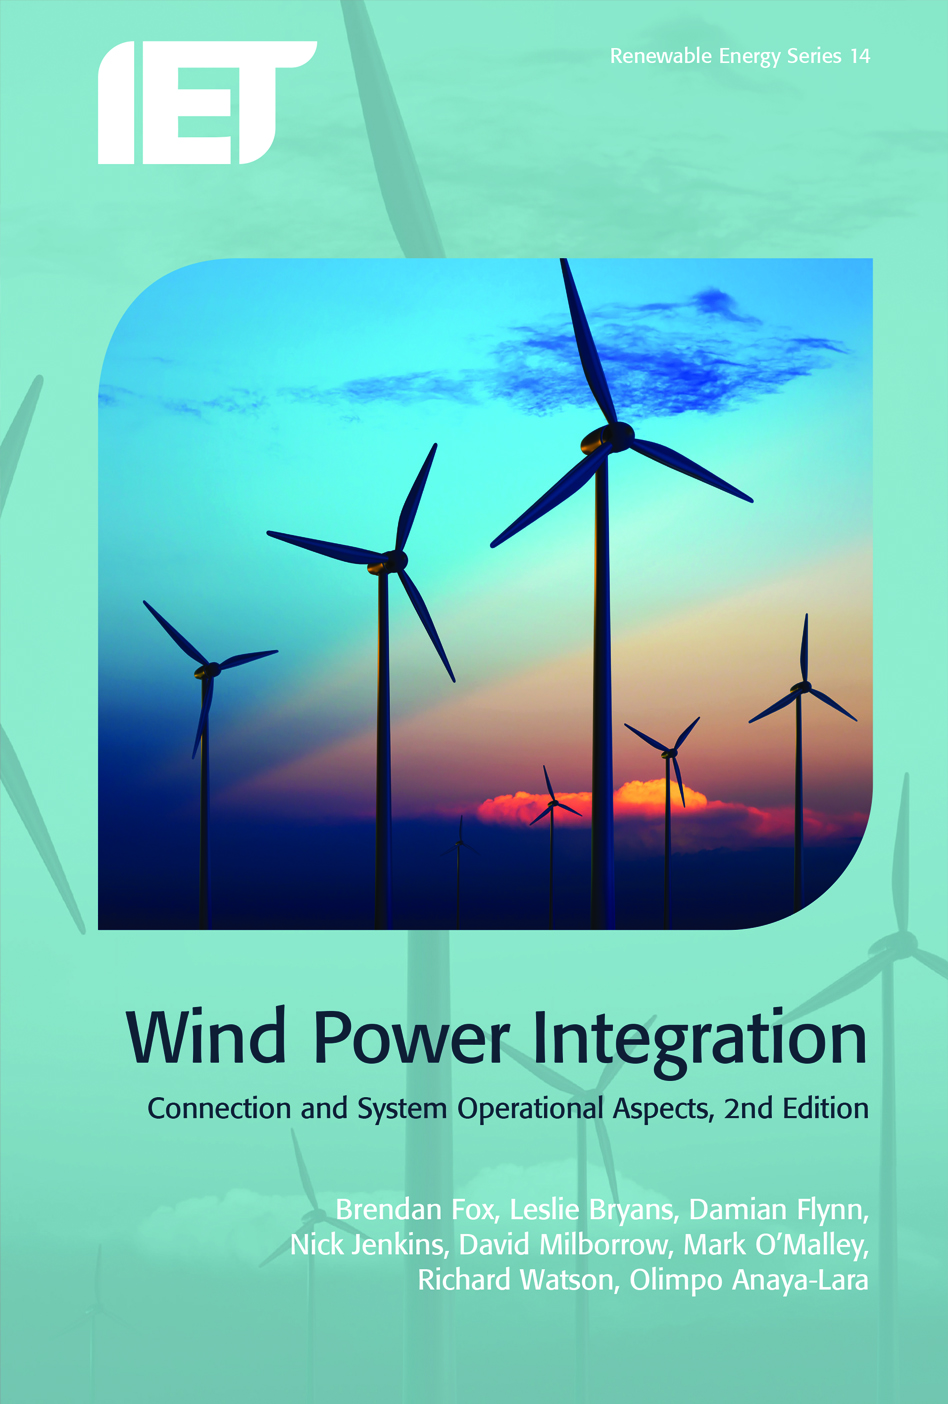 Wind Power Integration, Connection and system operational aspects, 2nd Edition